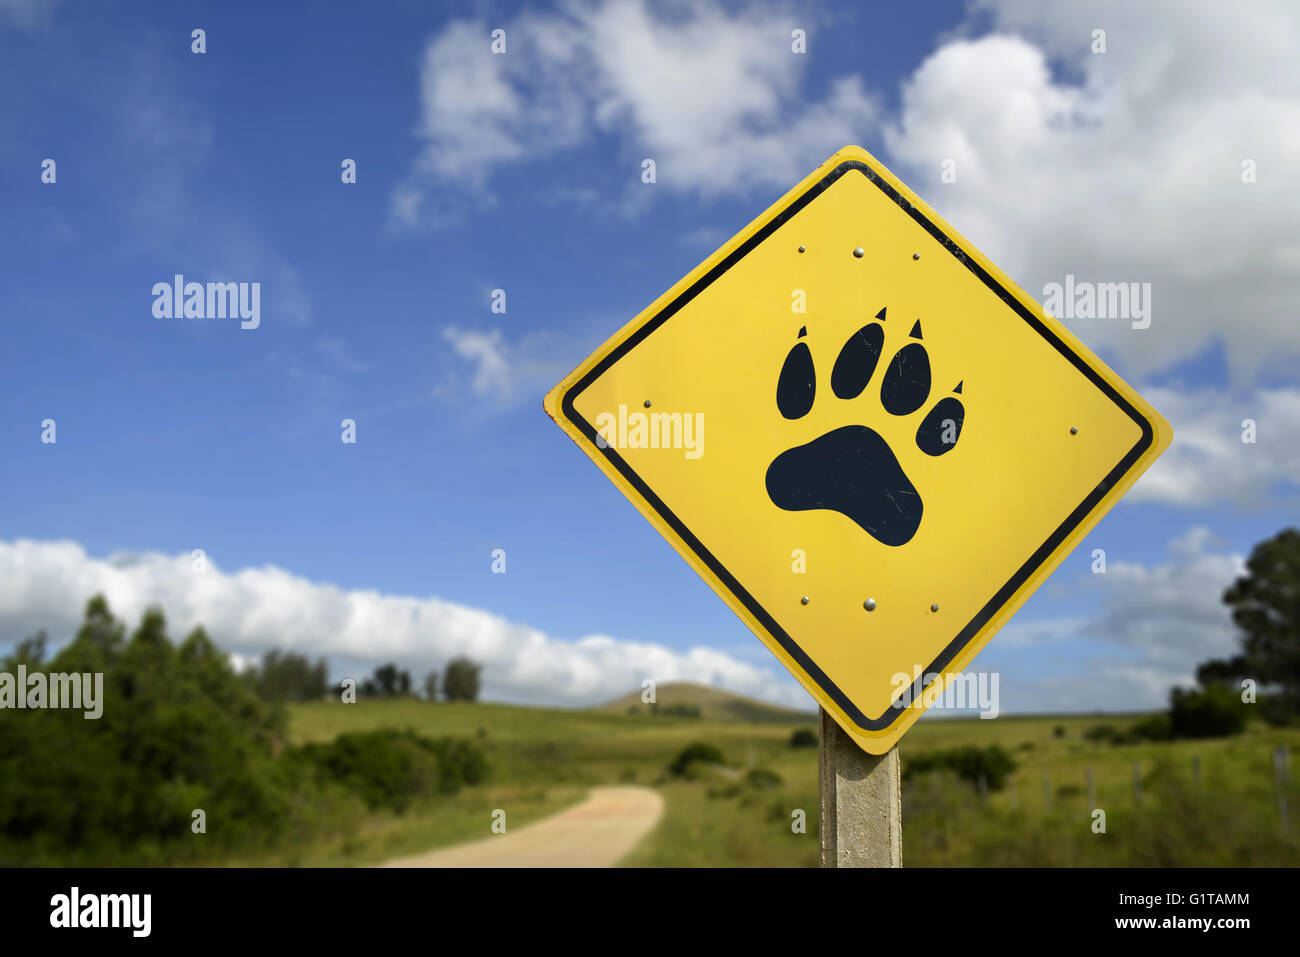 Wildlife animal conservation, save wild species concept. Road sign with paw foot print icon in wilderness environment, includes Stock Photo